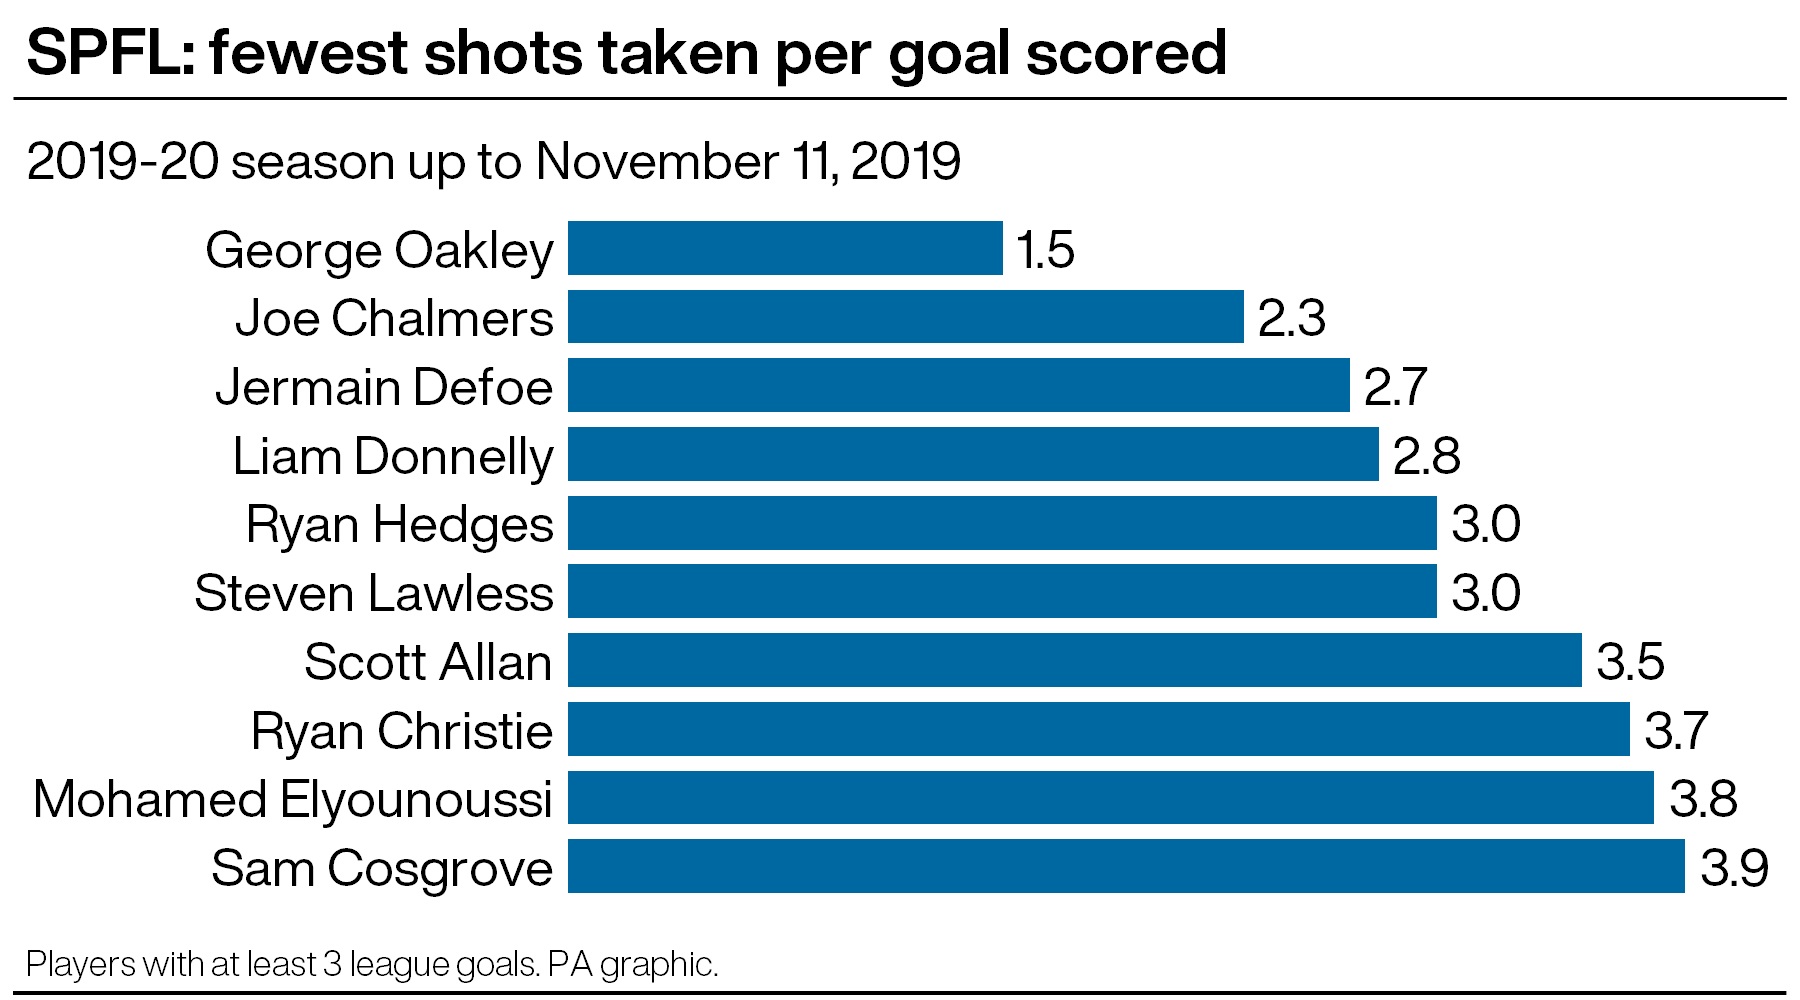 George Oakley makes the most of his shots